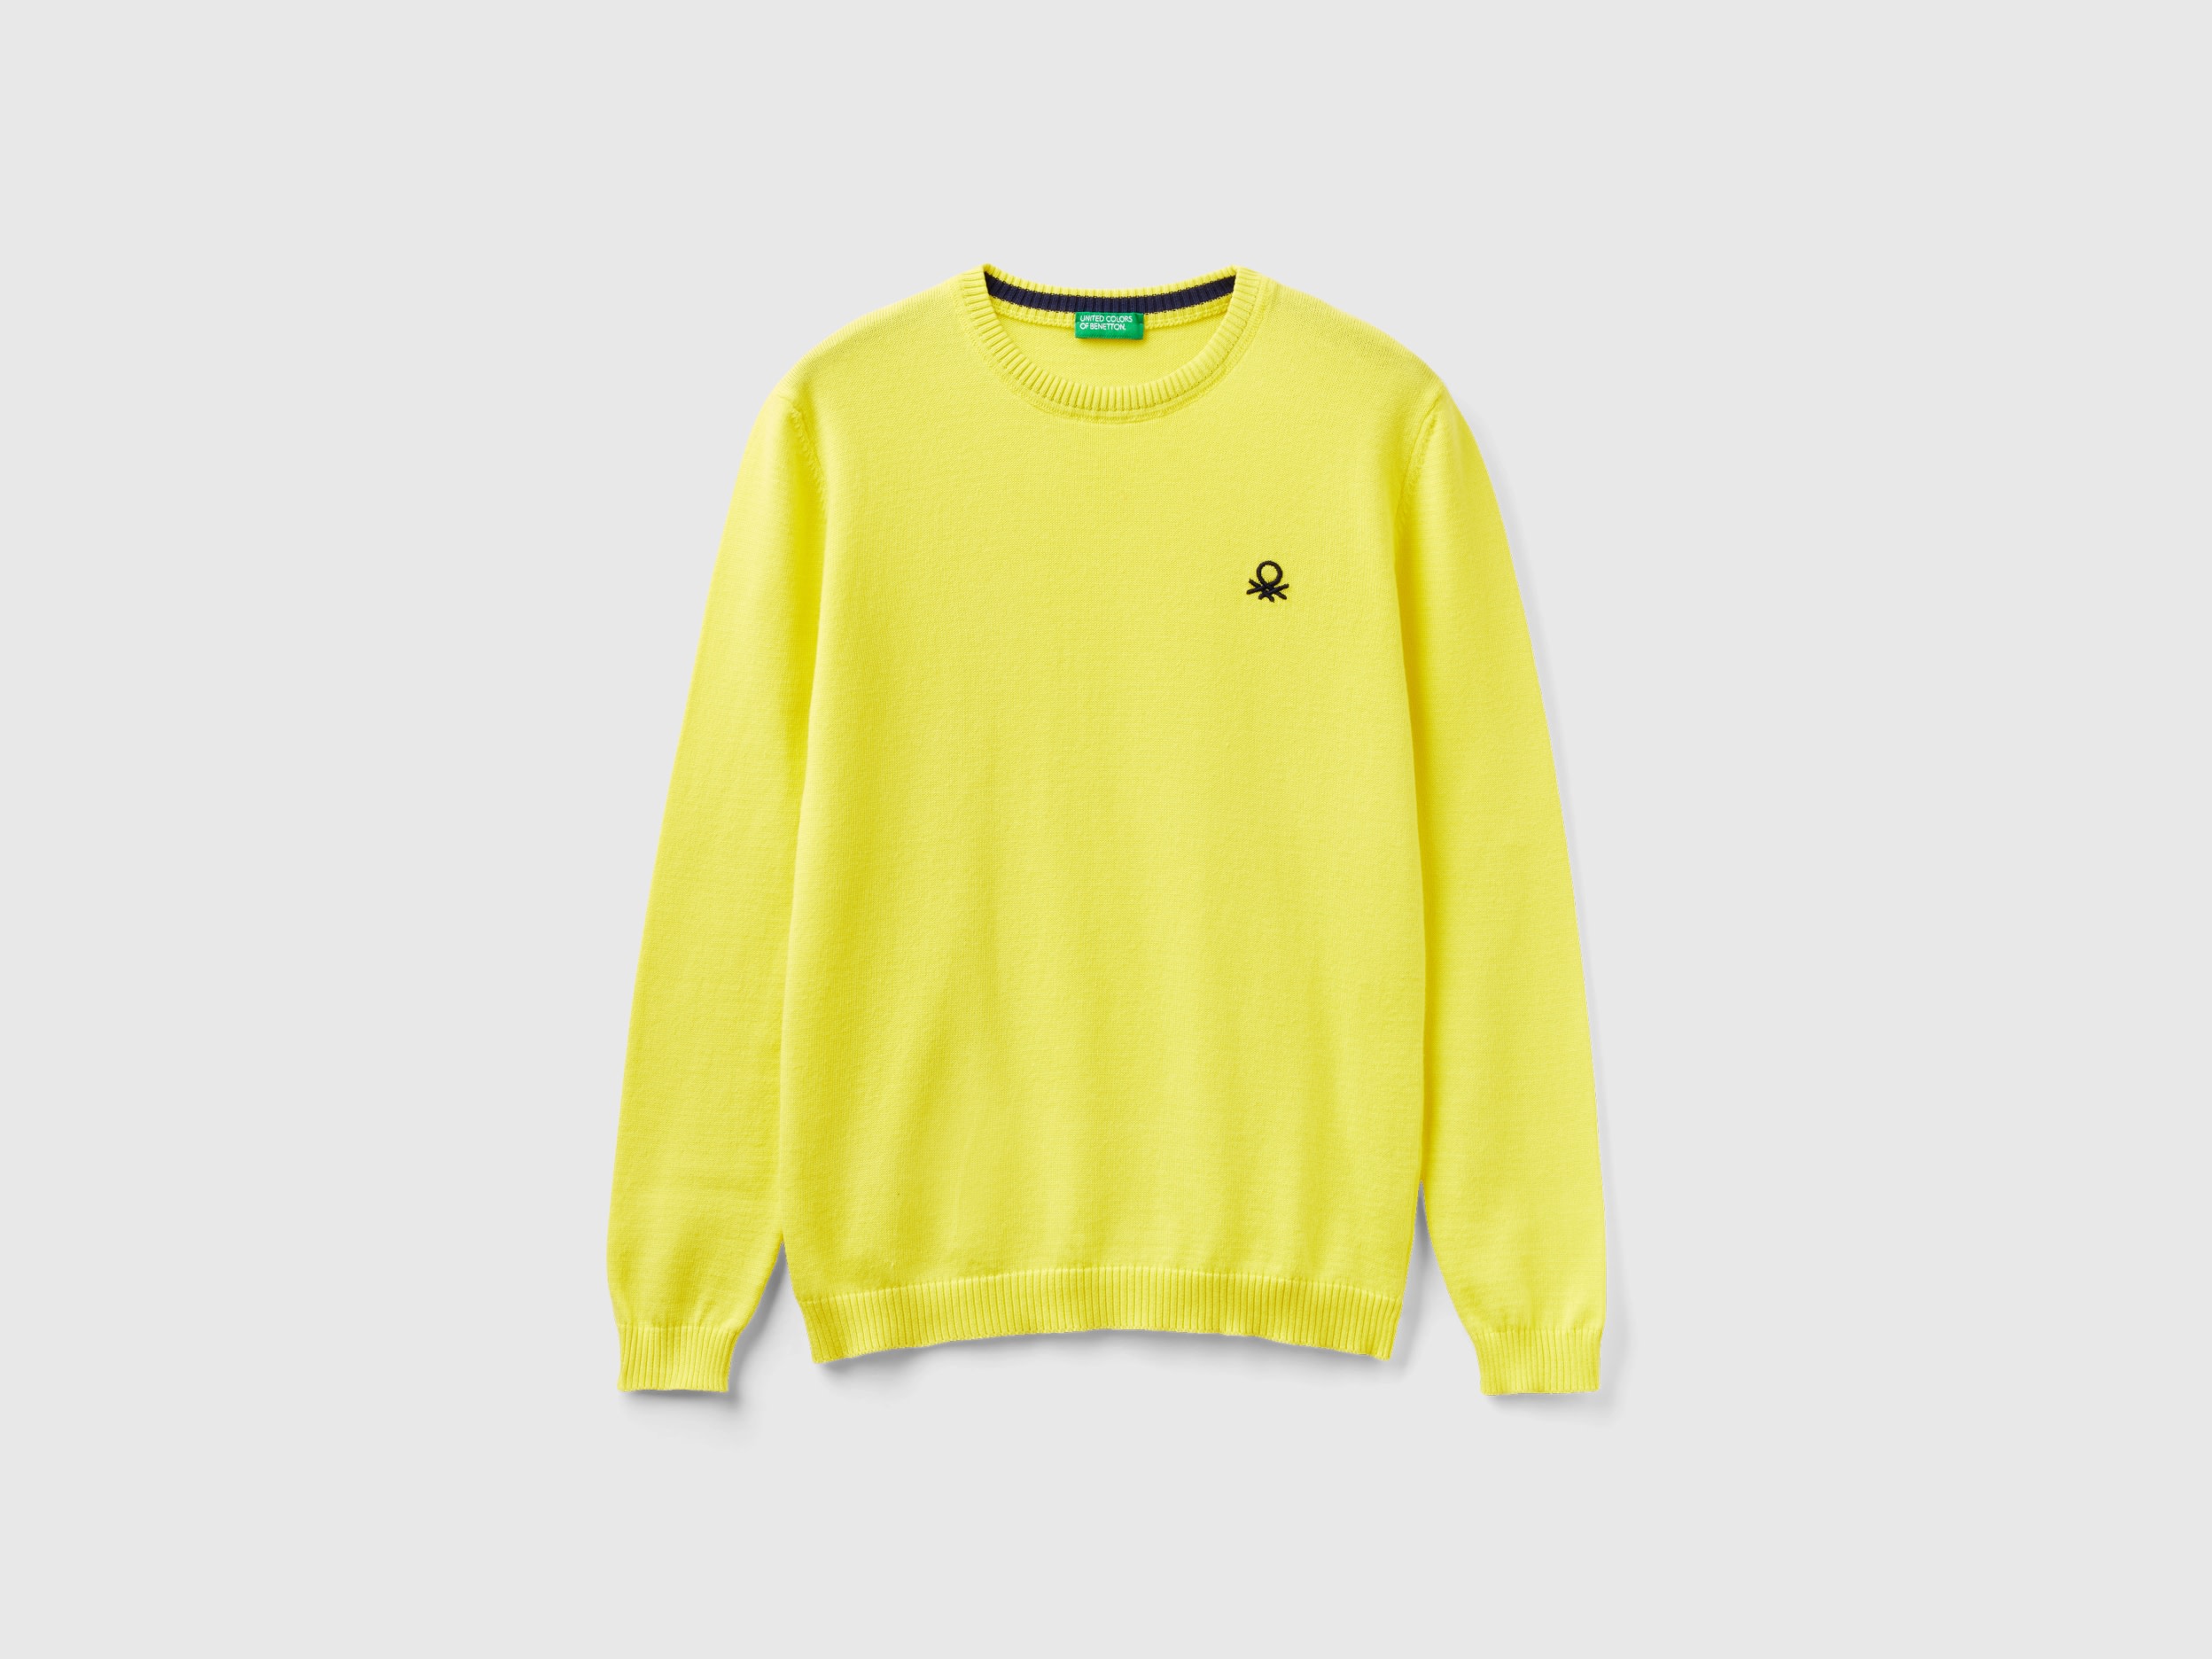 Benetton, Sweater In Pure Cotton With Logo, size S, Yellow, Kids